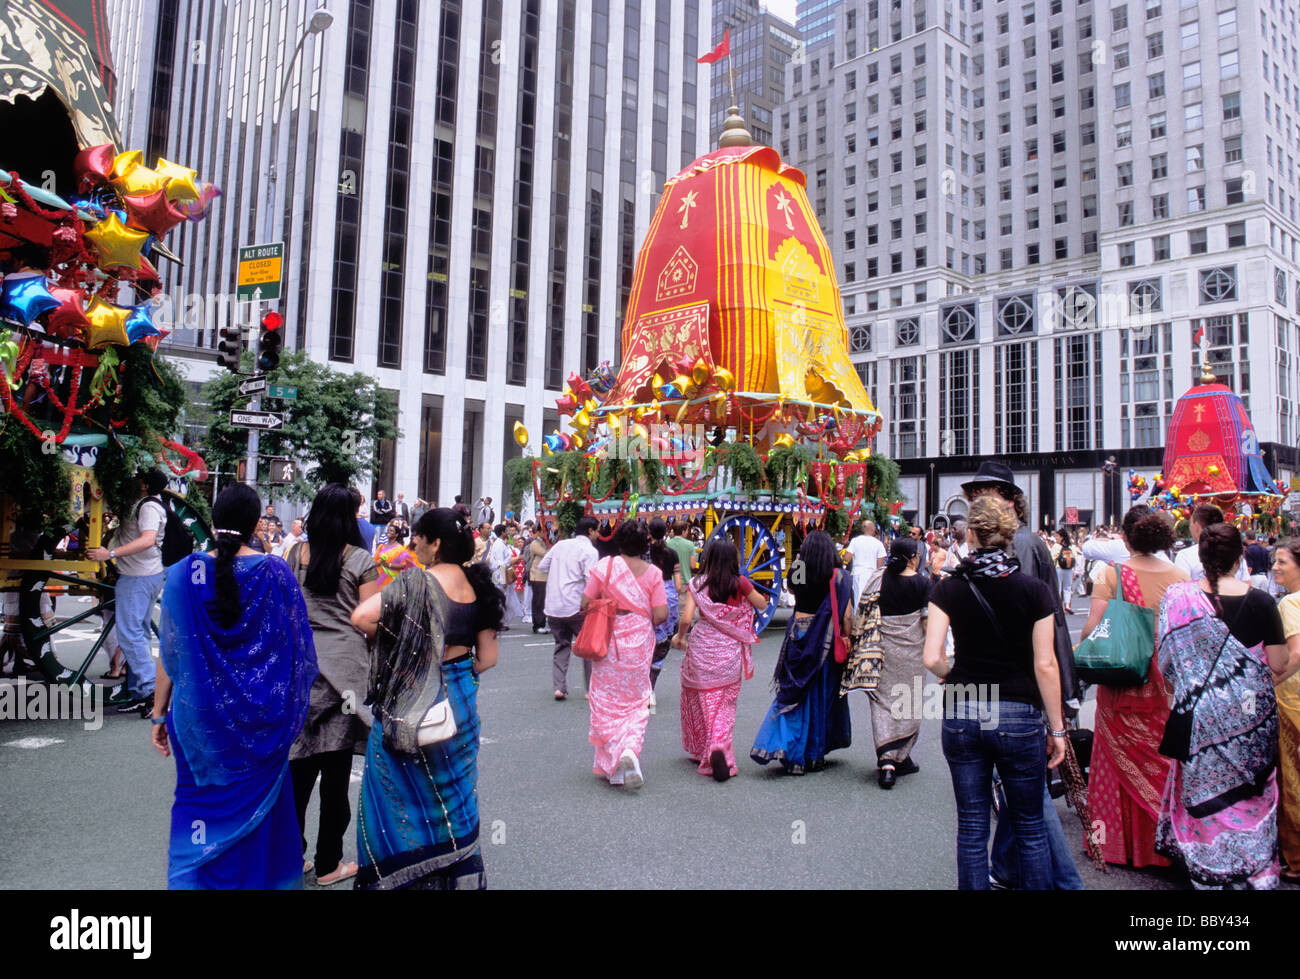 New York City Hare Krishna procession on Fifth Avenue. Women in saris following the colorful floats in the parade. Bystanders watching on the street. Stock Photo